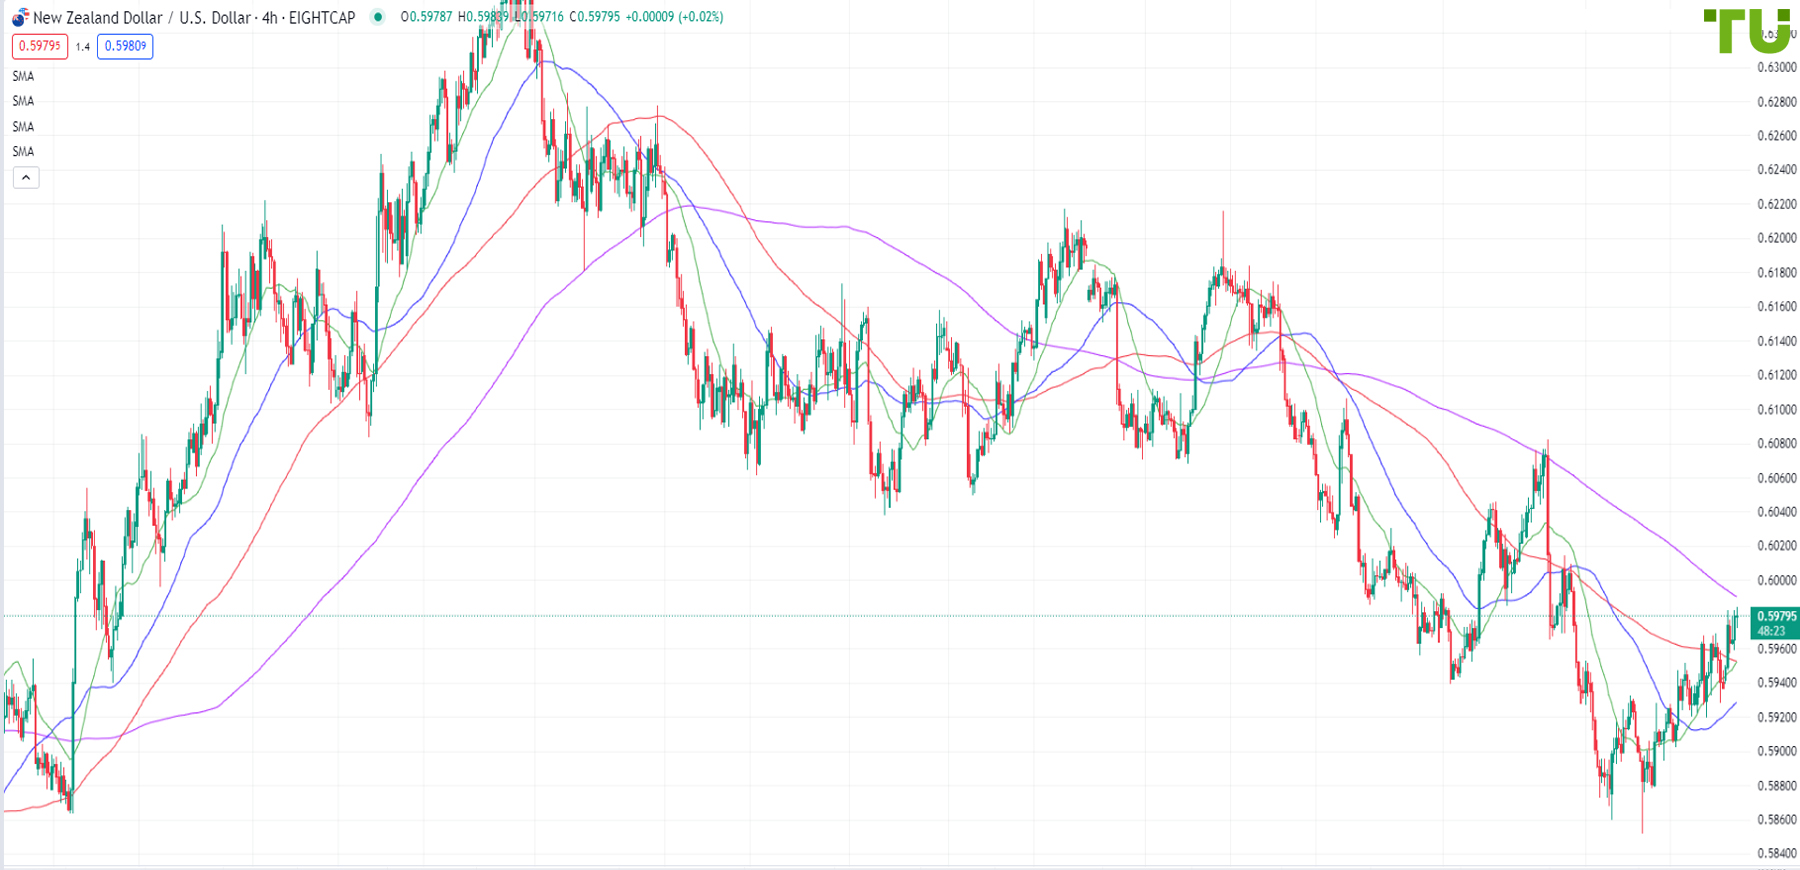 NZD/USD is also moving higher